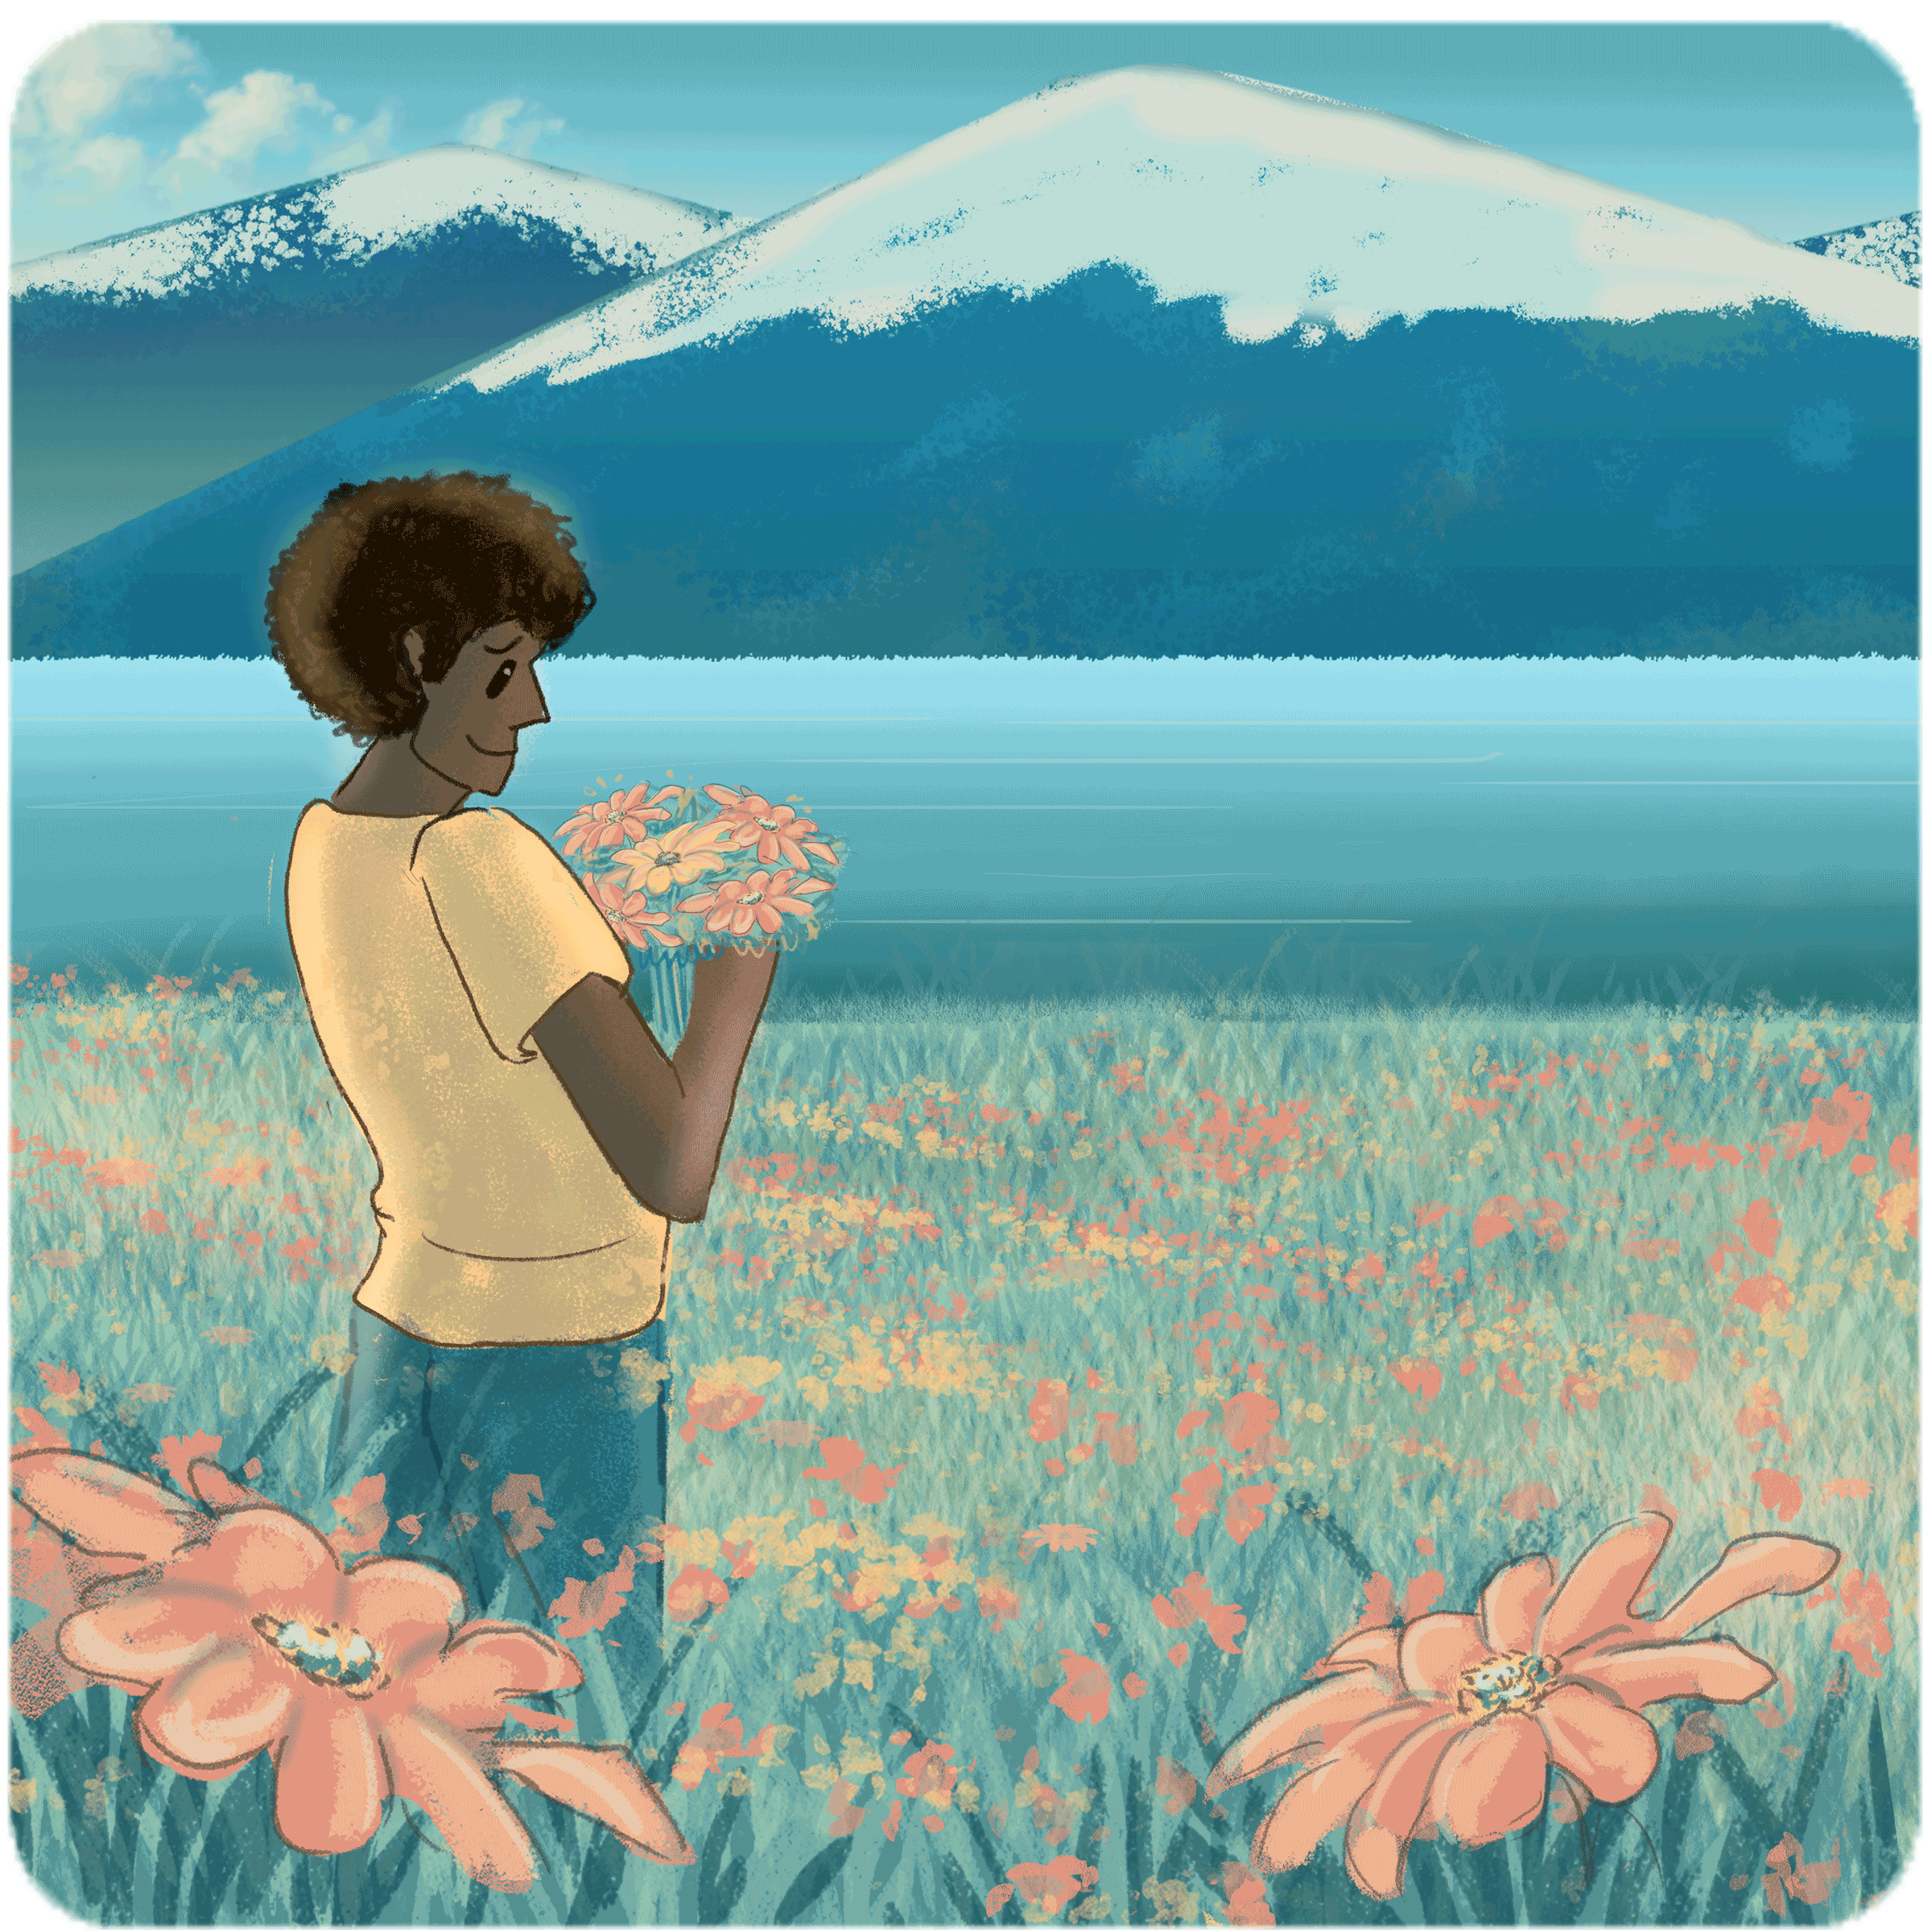 We zoom into a male figure standing in a grassy area by a lake and a mountain range. The grassy area is scattered with wildflowers. The male figure has a handful of flowers and is looking at them.